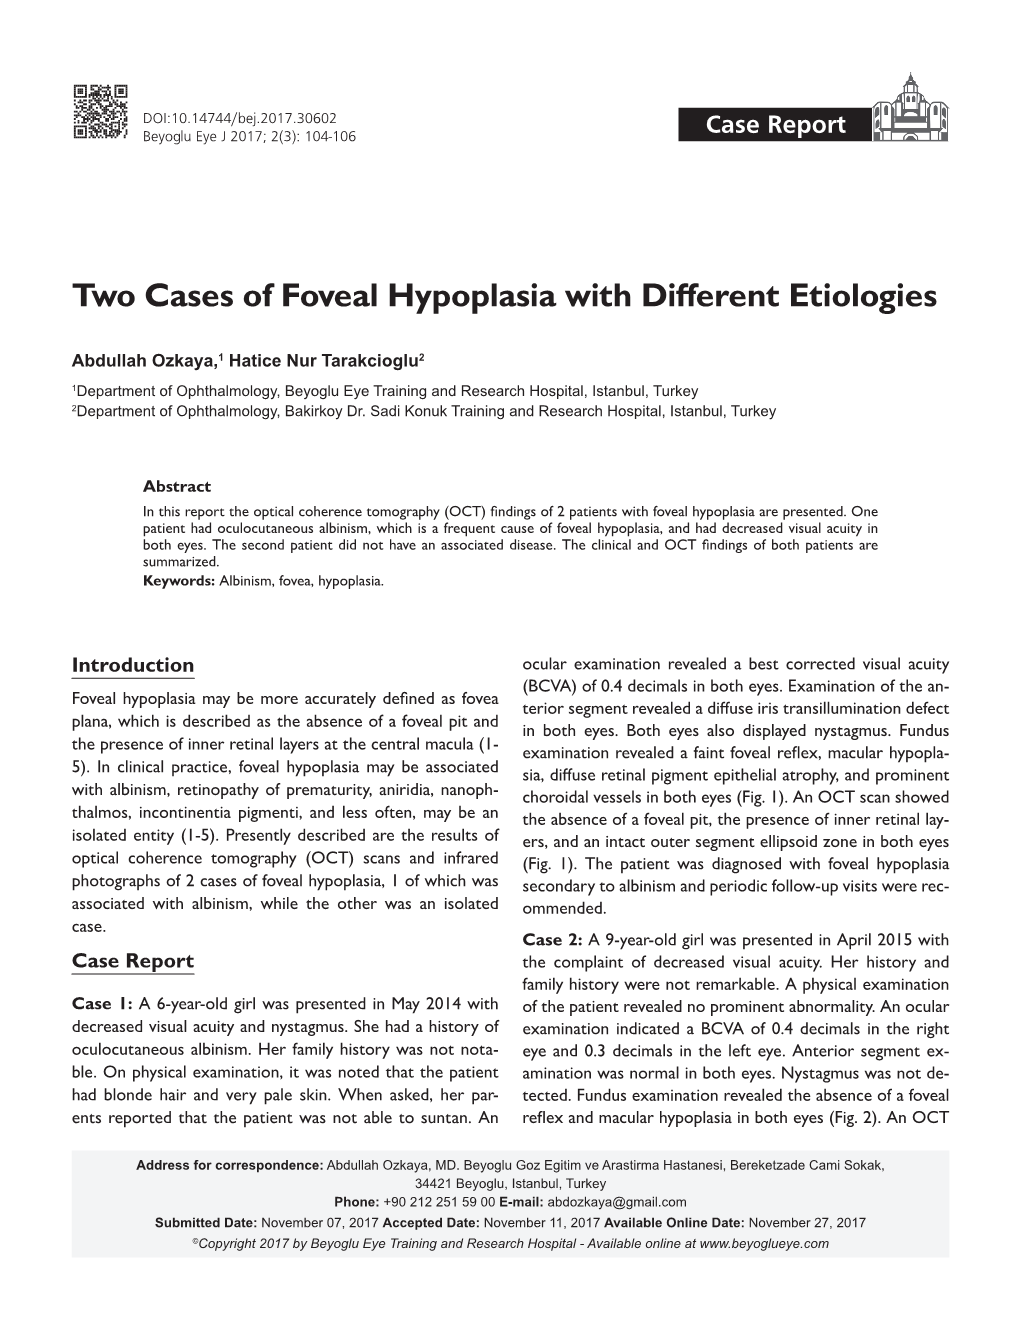 Two Cases of Foveal Hypoplasia with Different Etiologies